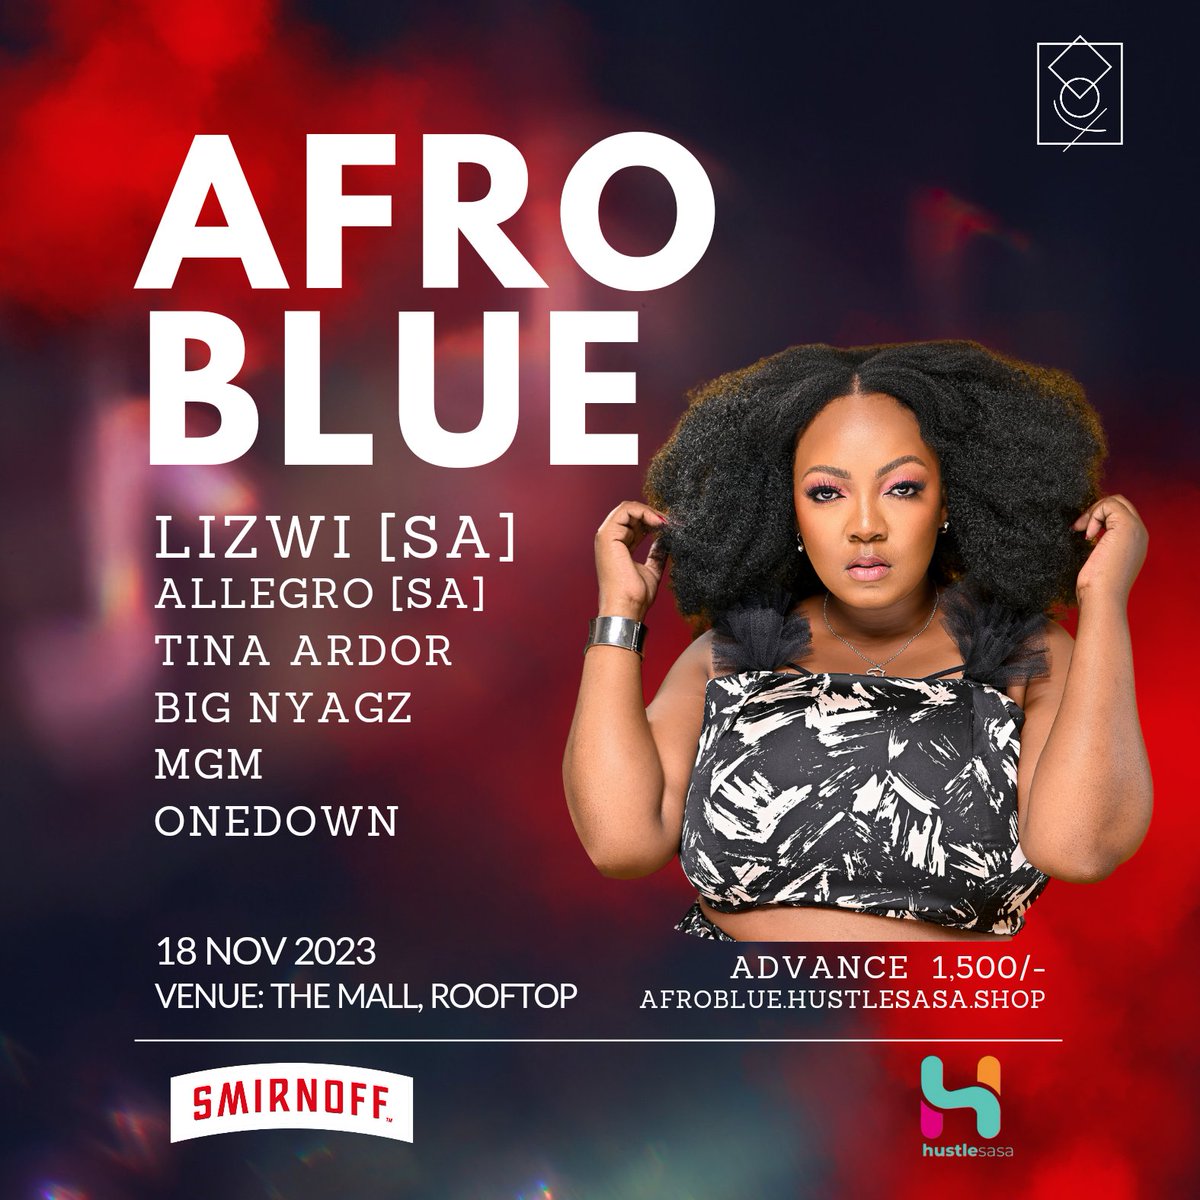 Gracing our vibe stage once again, she is undoubtedly the Queen of African Chants. Afroblue is honoured to have LIZWI join our bill this November 18th in the heart of Westlands, The Mall rooftop. She is joined by Dj/Producer Allegro (SA), Tina Ardor, Big Nyagz, One Down & myself.